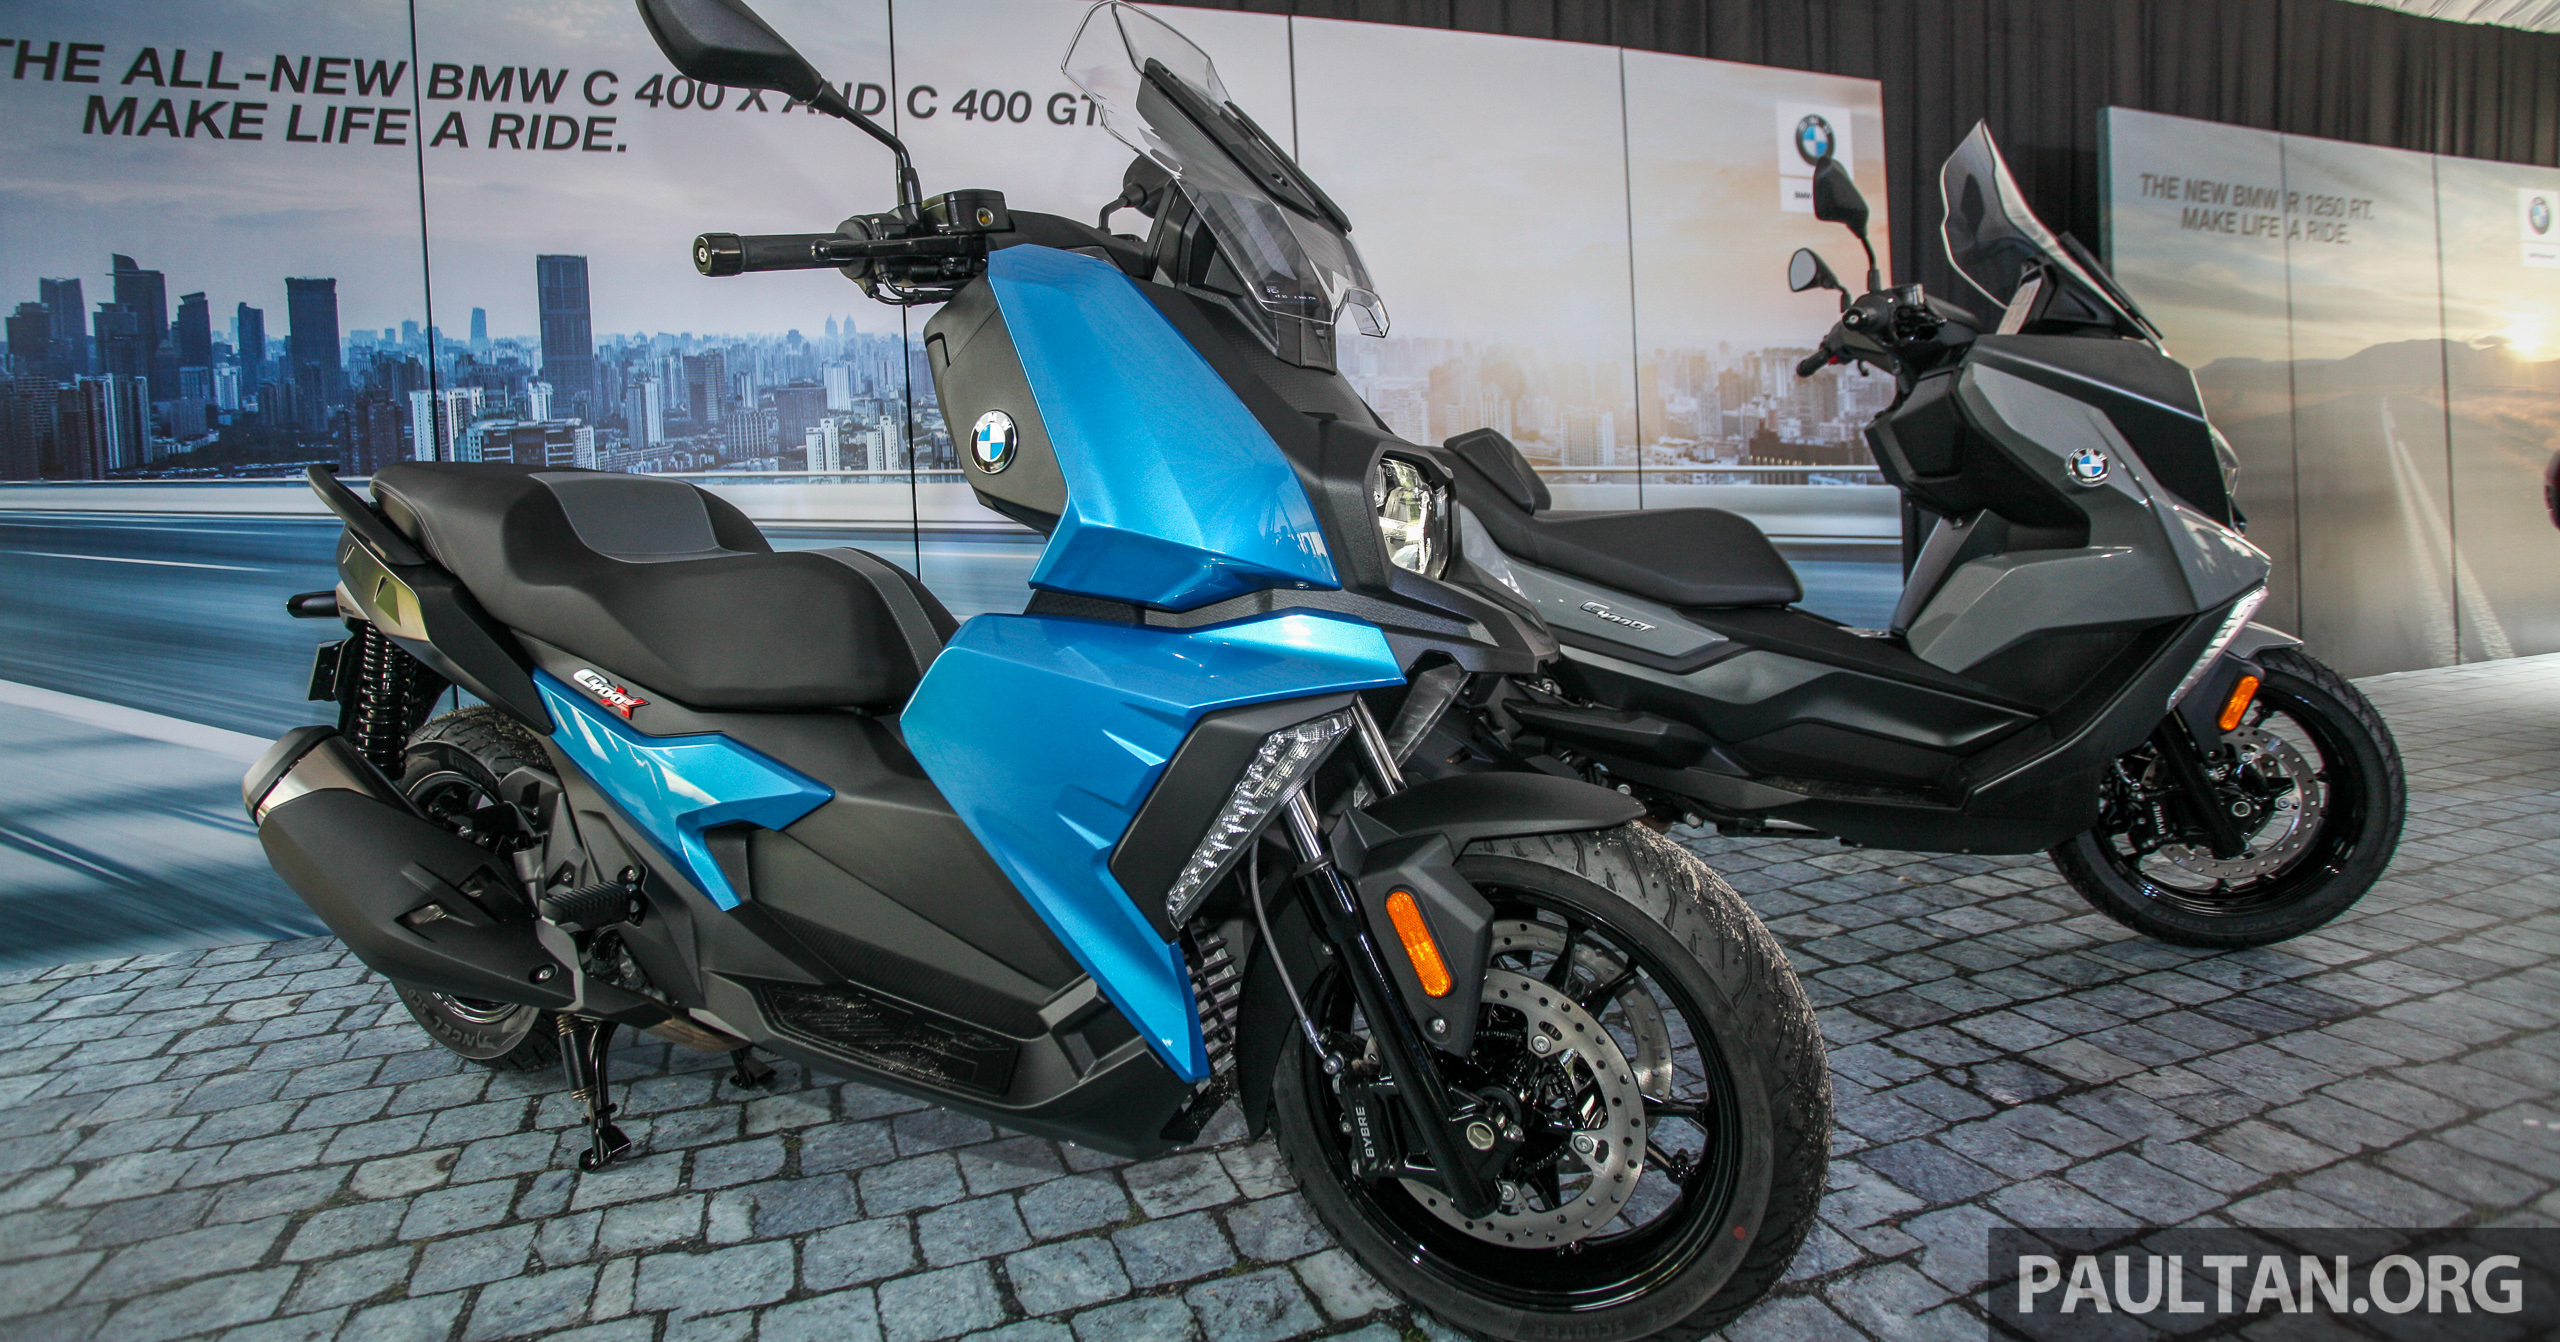 lektie hjerte ring 2019 BMW Motorrad C 400 X and C 400 GT scooters launched in Malaysia, at  RM44,500 and RM48,500 - paultan.org